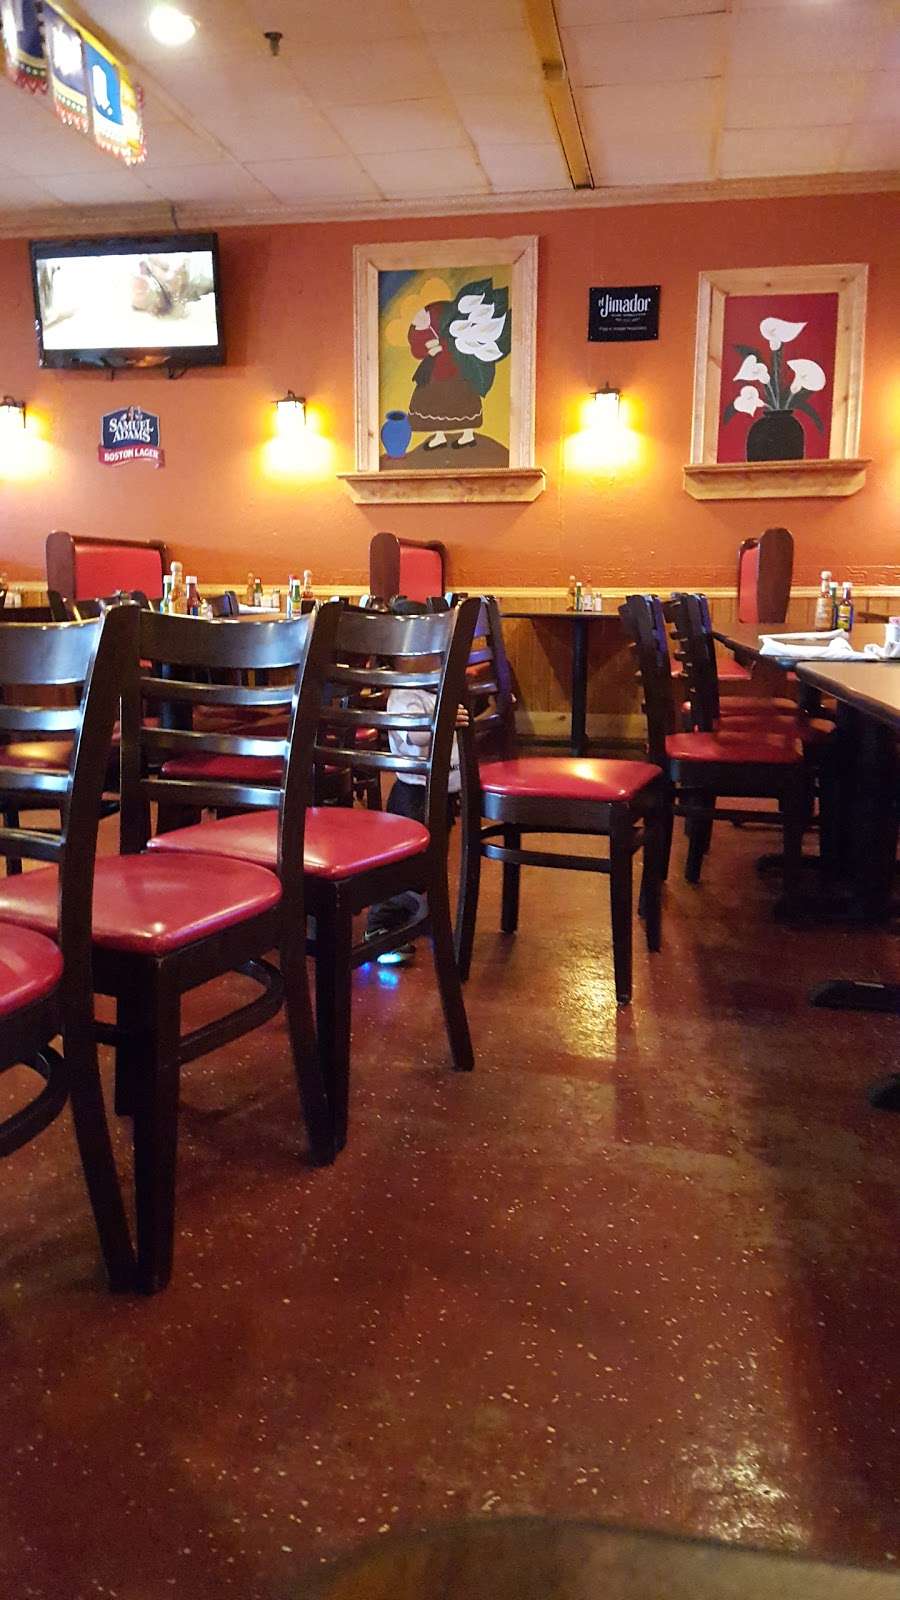 El Chile Poblano Mexican Restaurant | 1921 N Greensburg Crossing, Greensburg, IN 47240, USA | Phone: (812) 663-8349